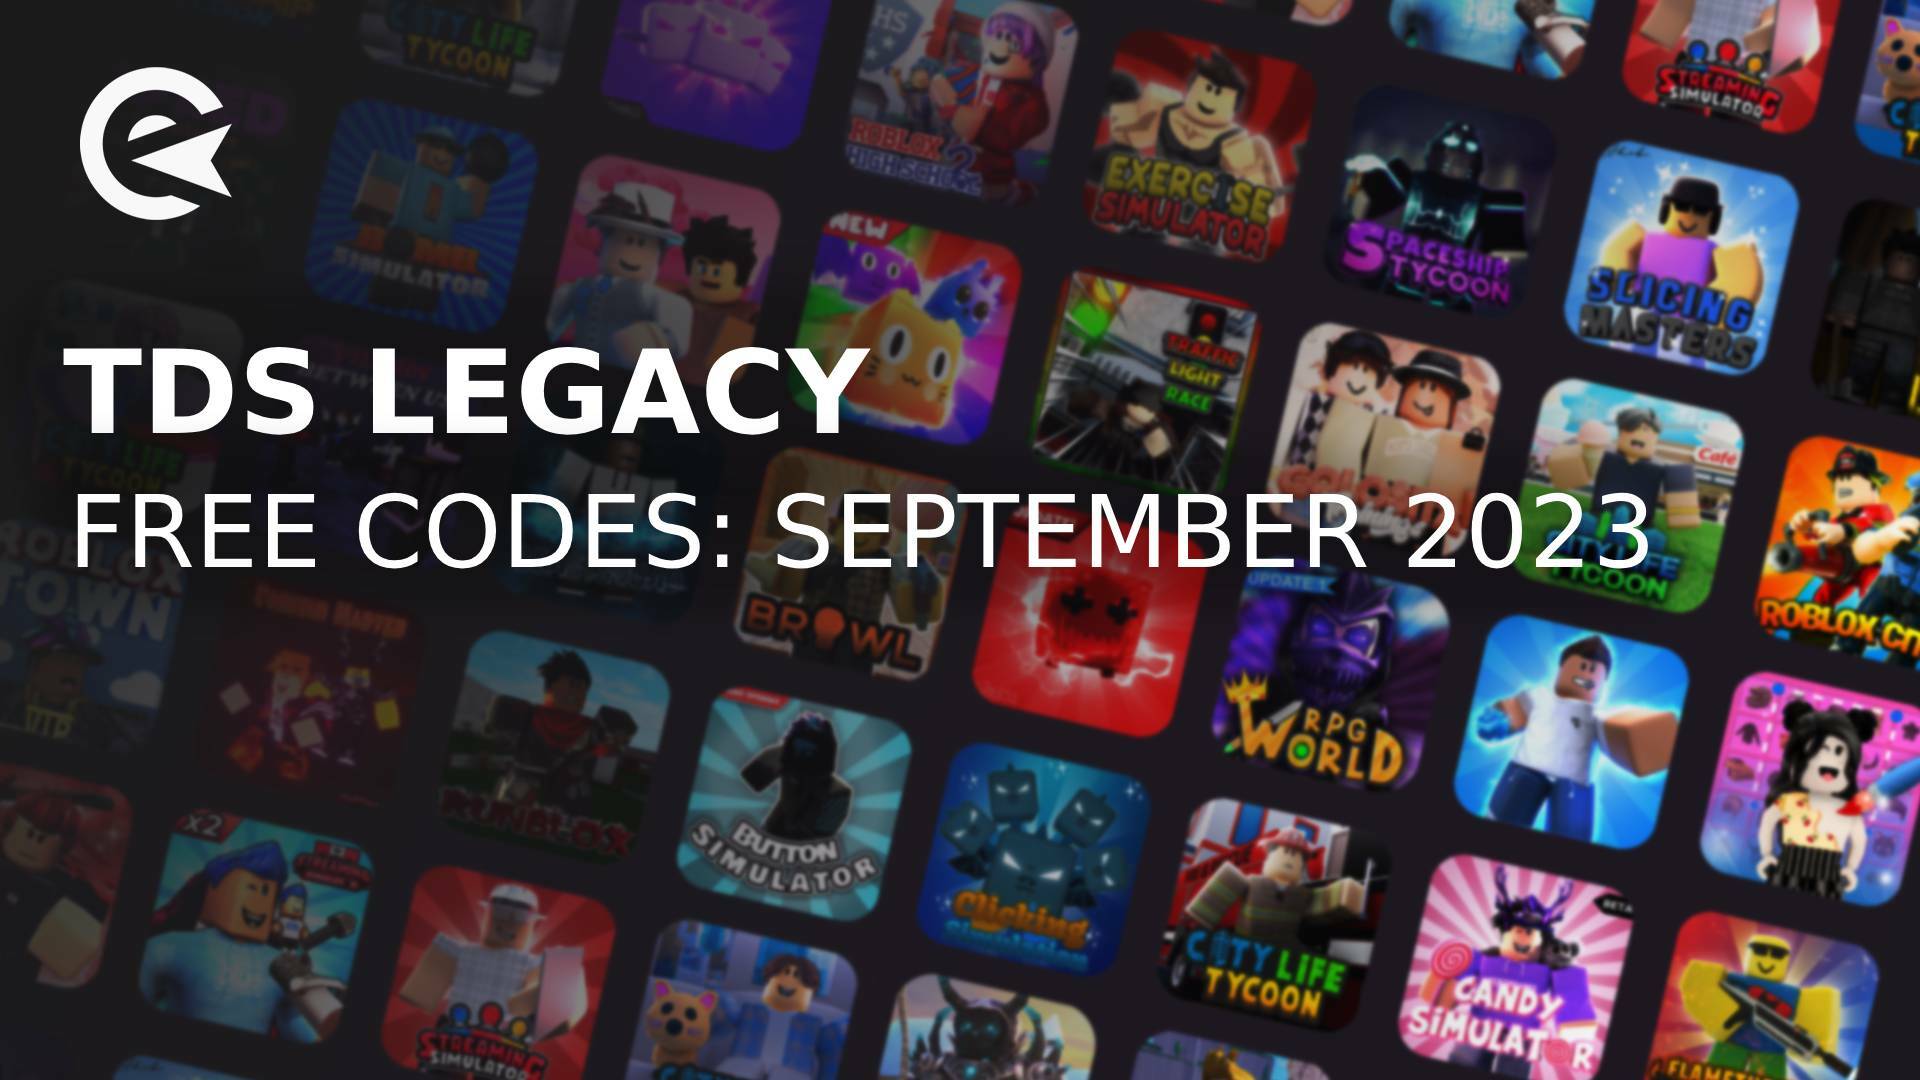 Roblox TDS Legacy codes for free Party Crates, Skins, more in December 2023  - Charlie INTEL